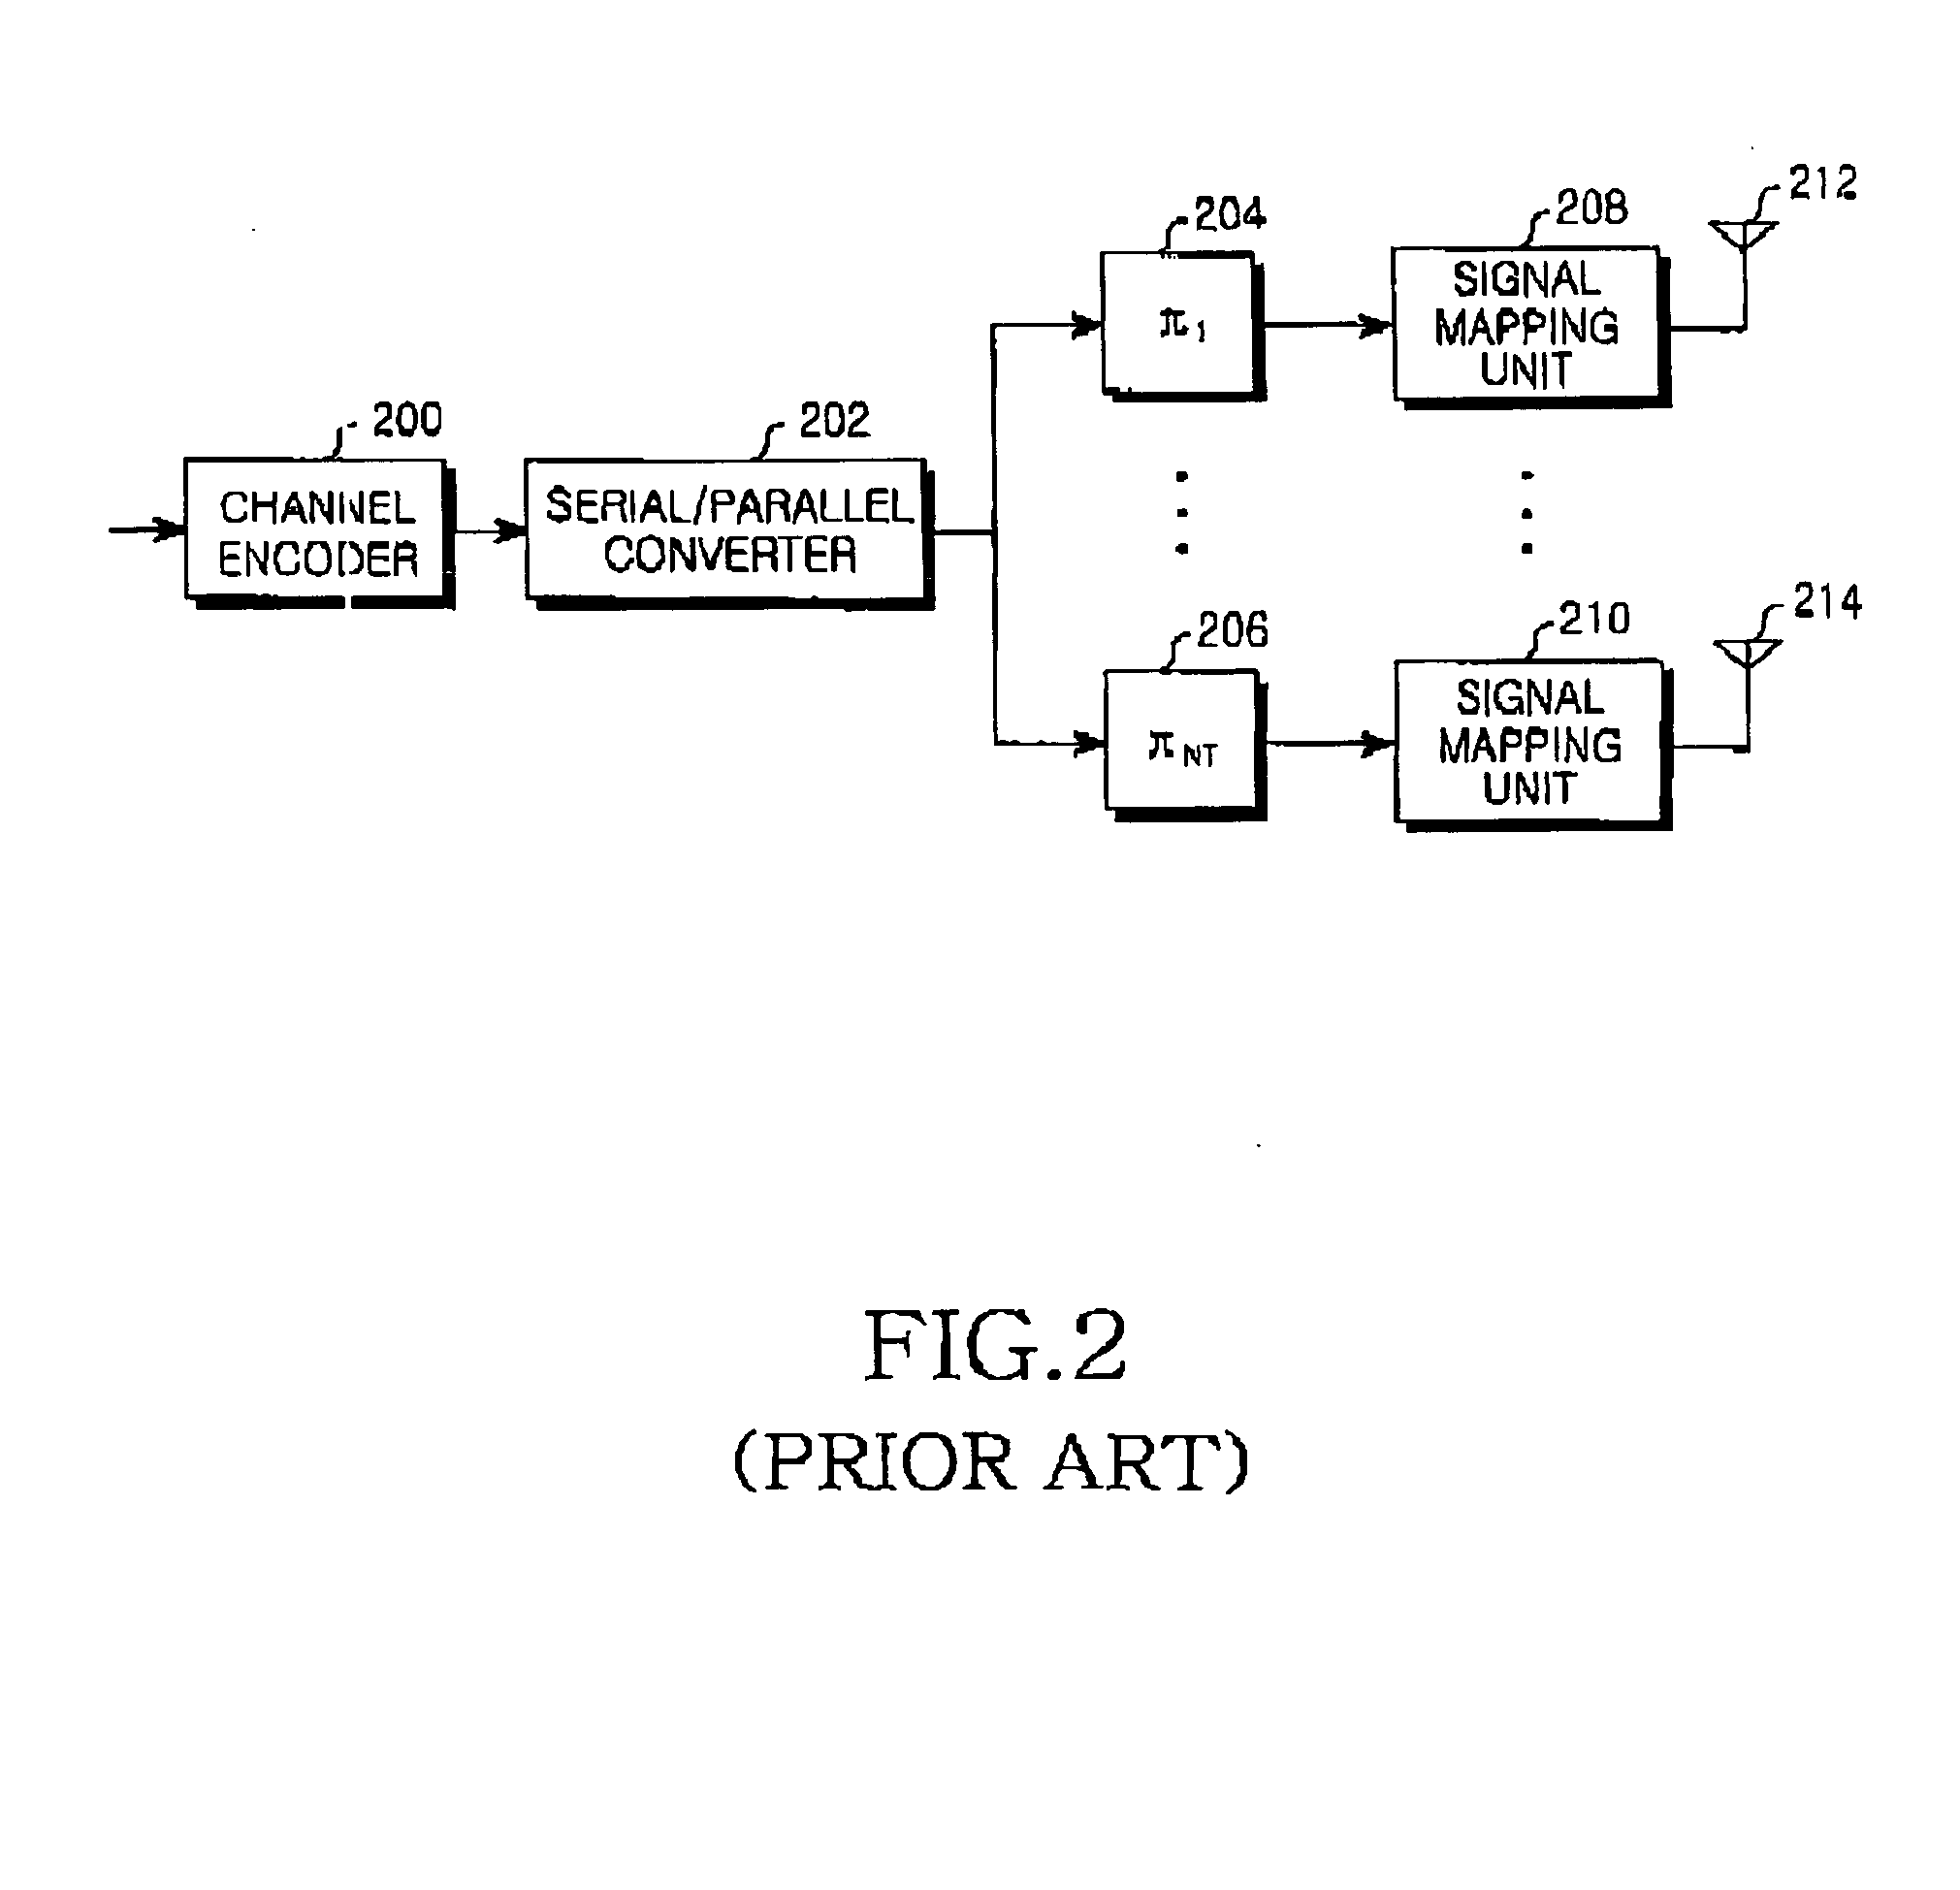 Method and apparatus for space-time coding using lifting low density parity check codes in a wireless communication system